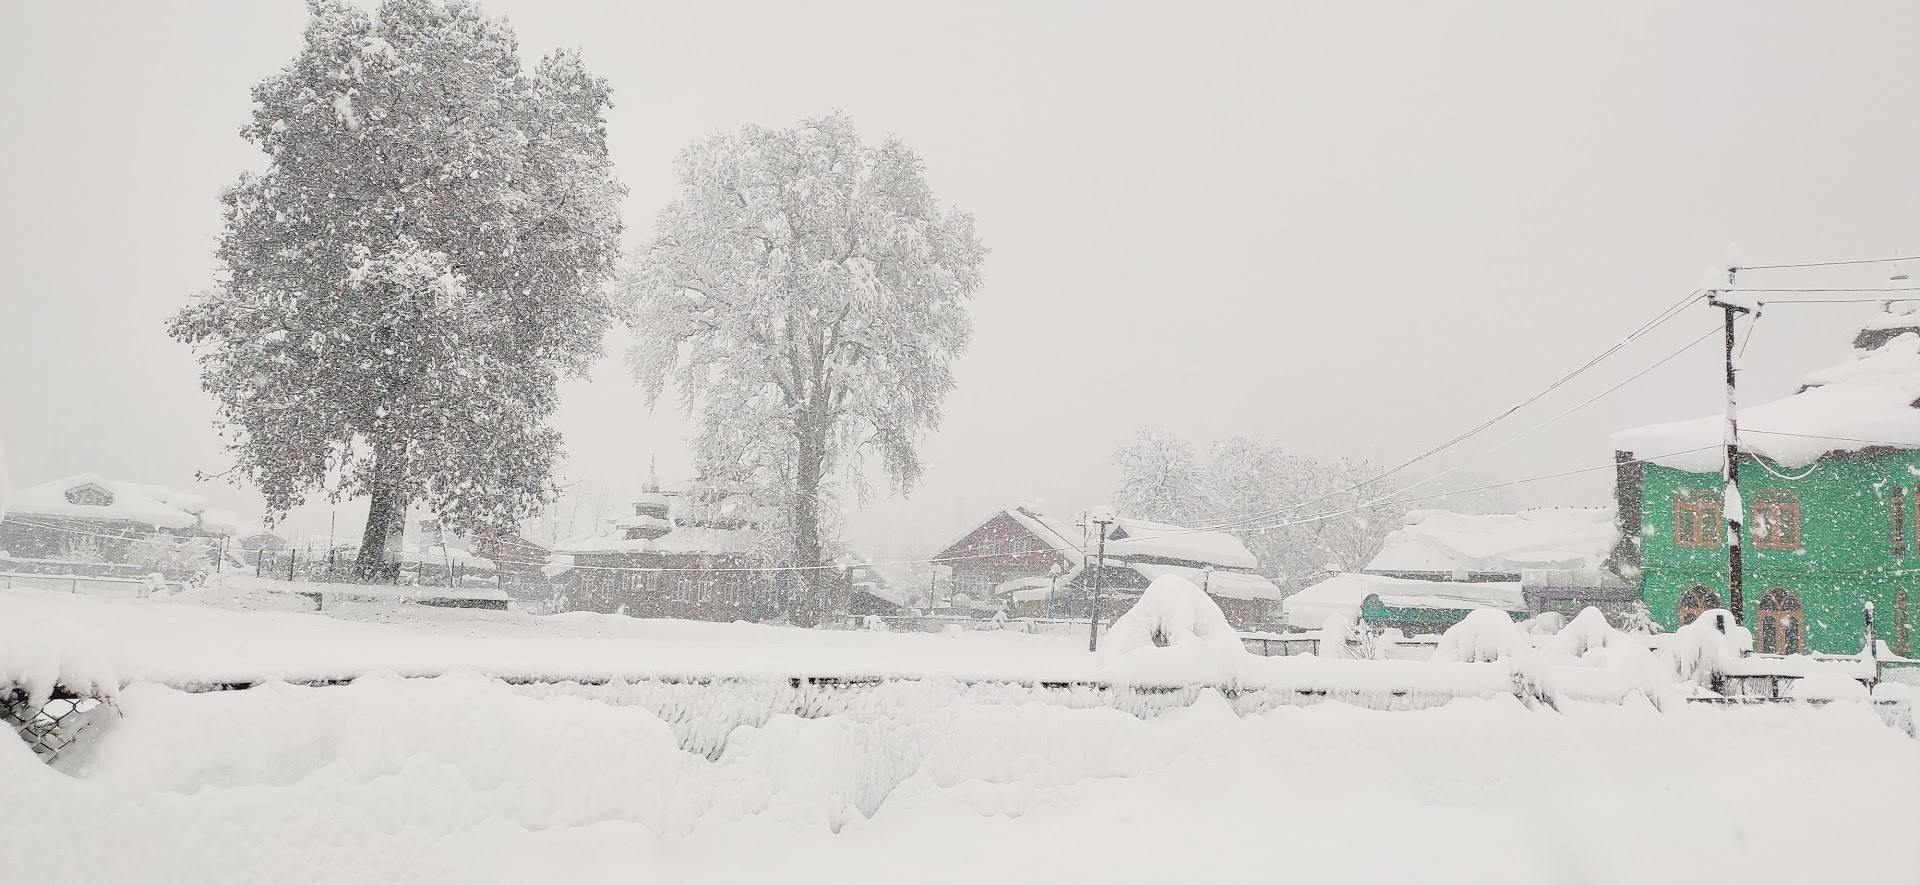 1st Place Extreme snowfall disrupted Kokernag Town of Jammu and Kashmir state of India by Dr Anoop Mishra @SkepticalAnoop